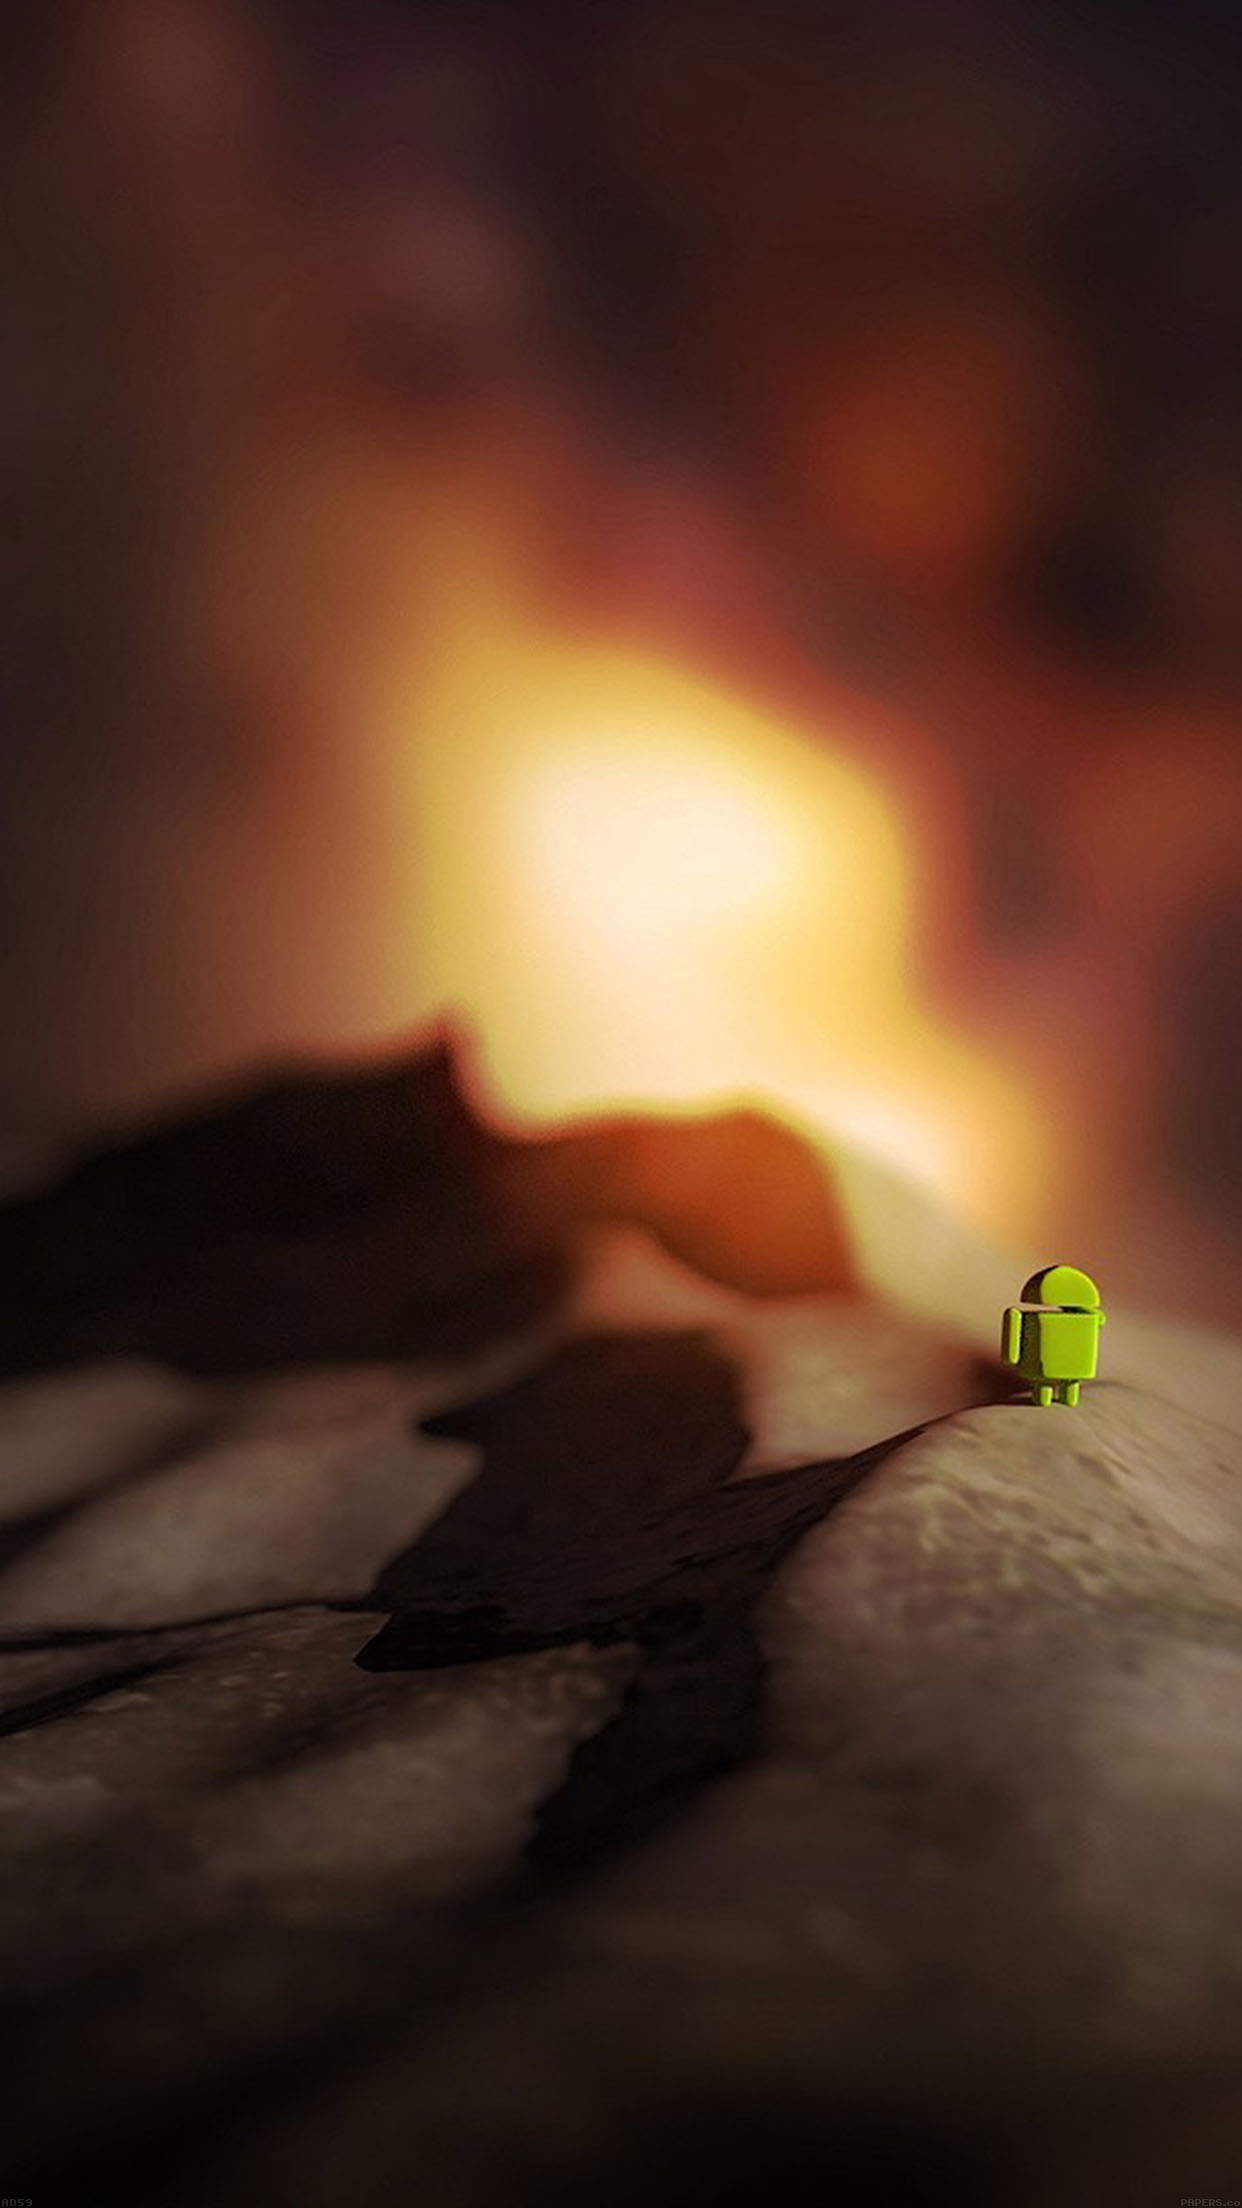 Android Campfire Toy Android wallpaper